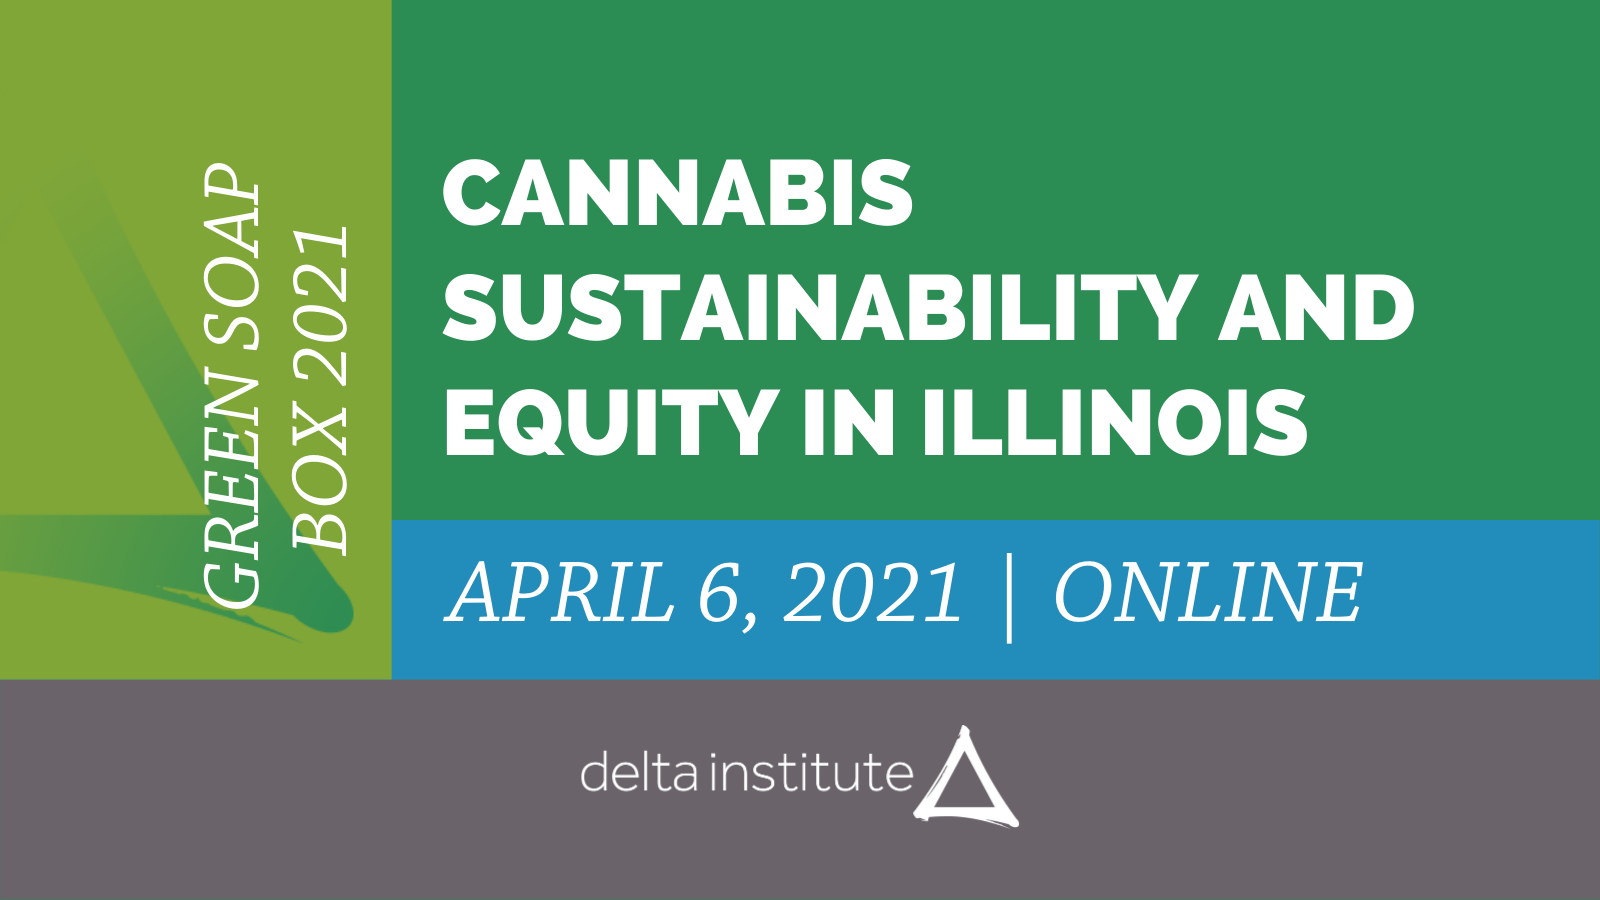 Cannabis Sustainability and Equity in Illinois